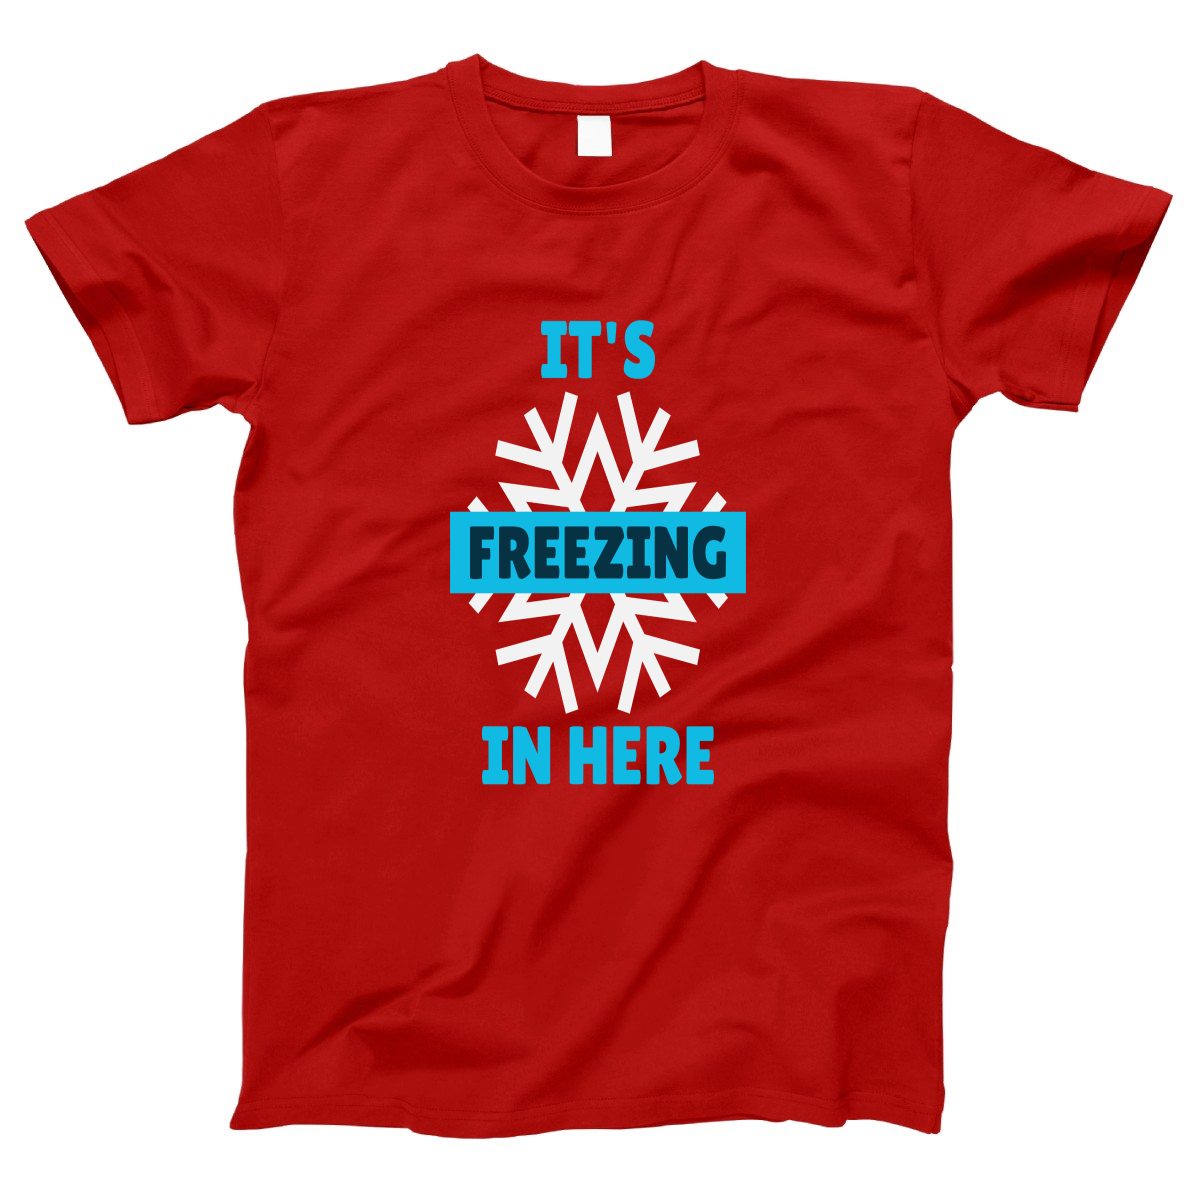 It's Freezing In Here! Women's T-shirt | Red